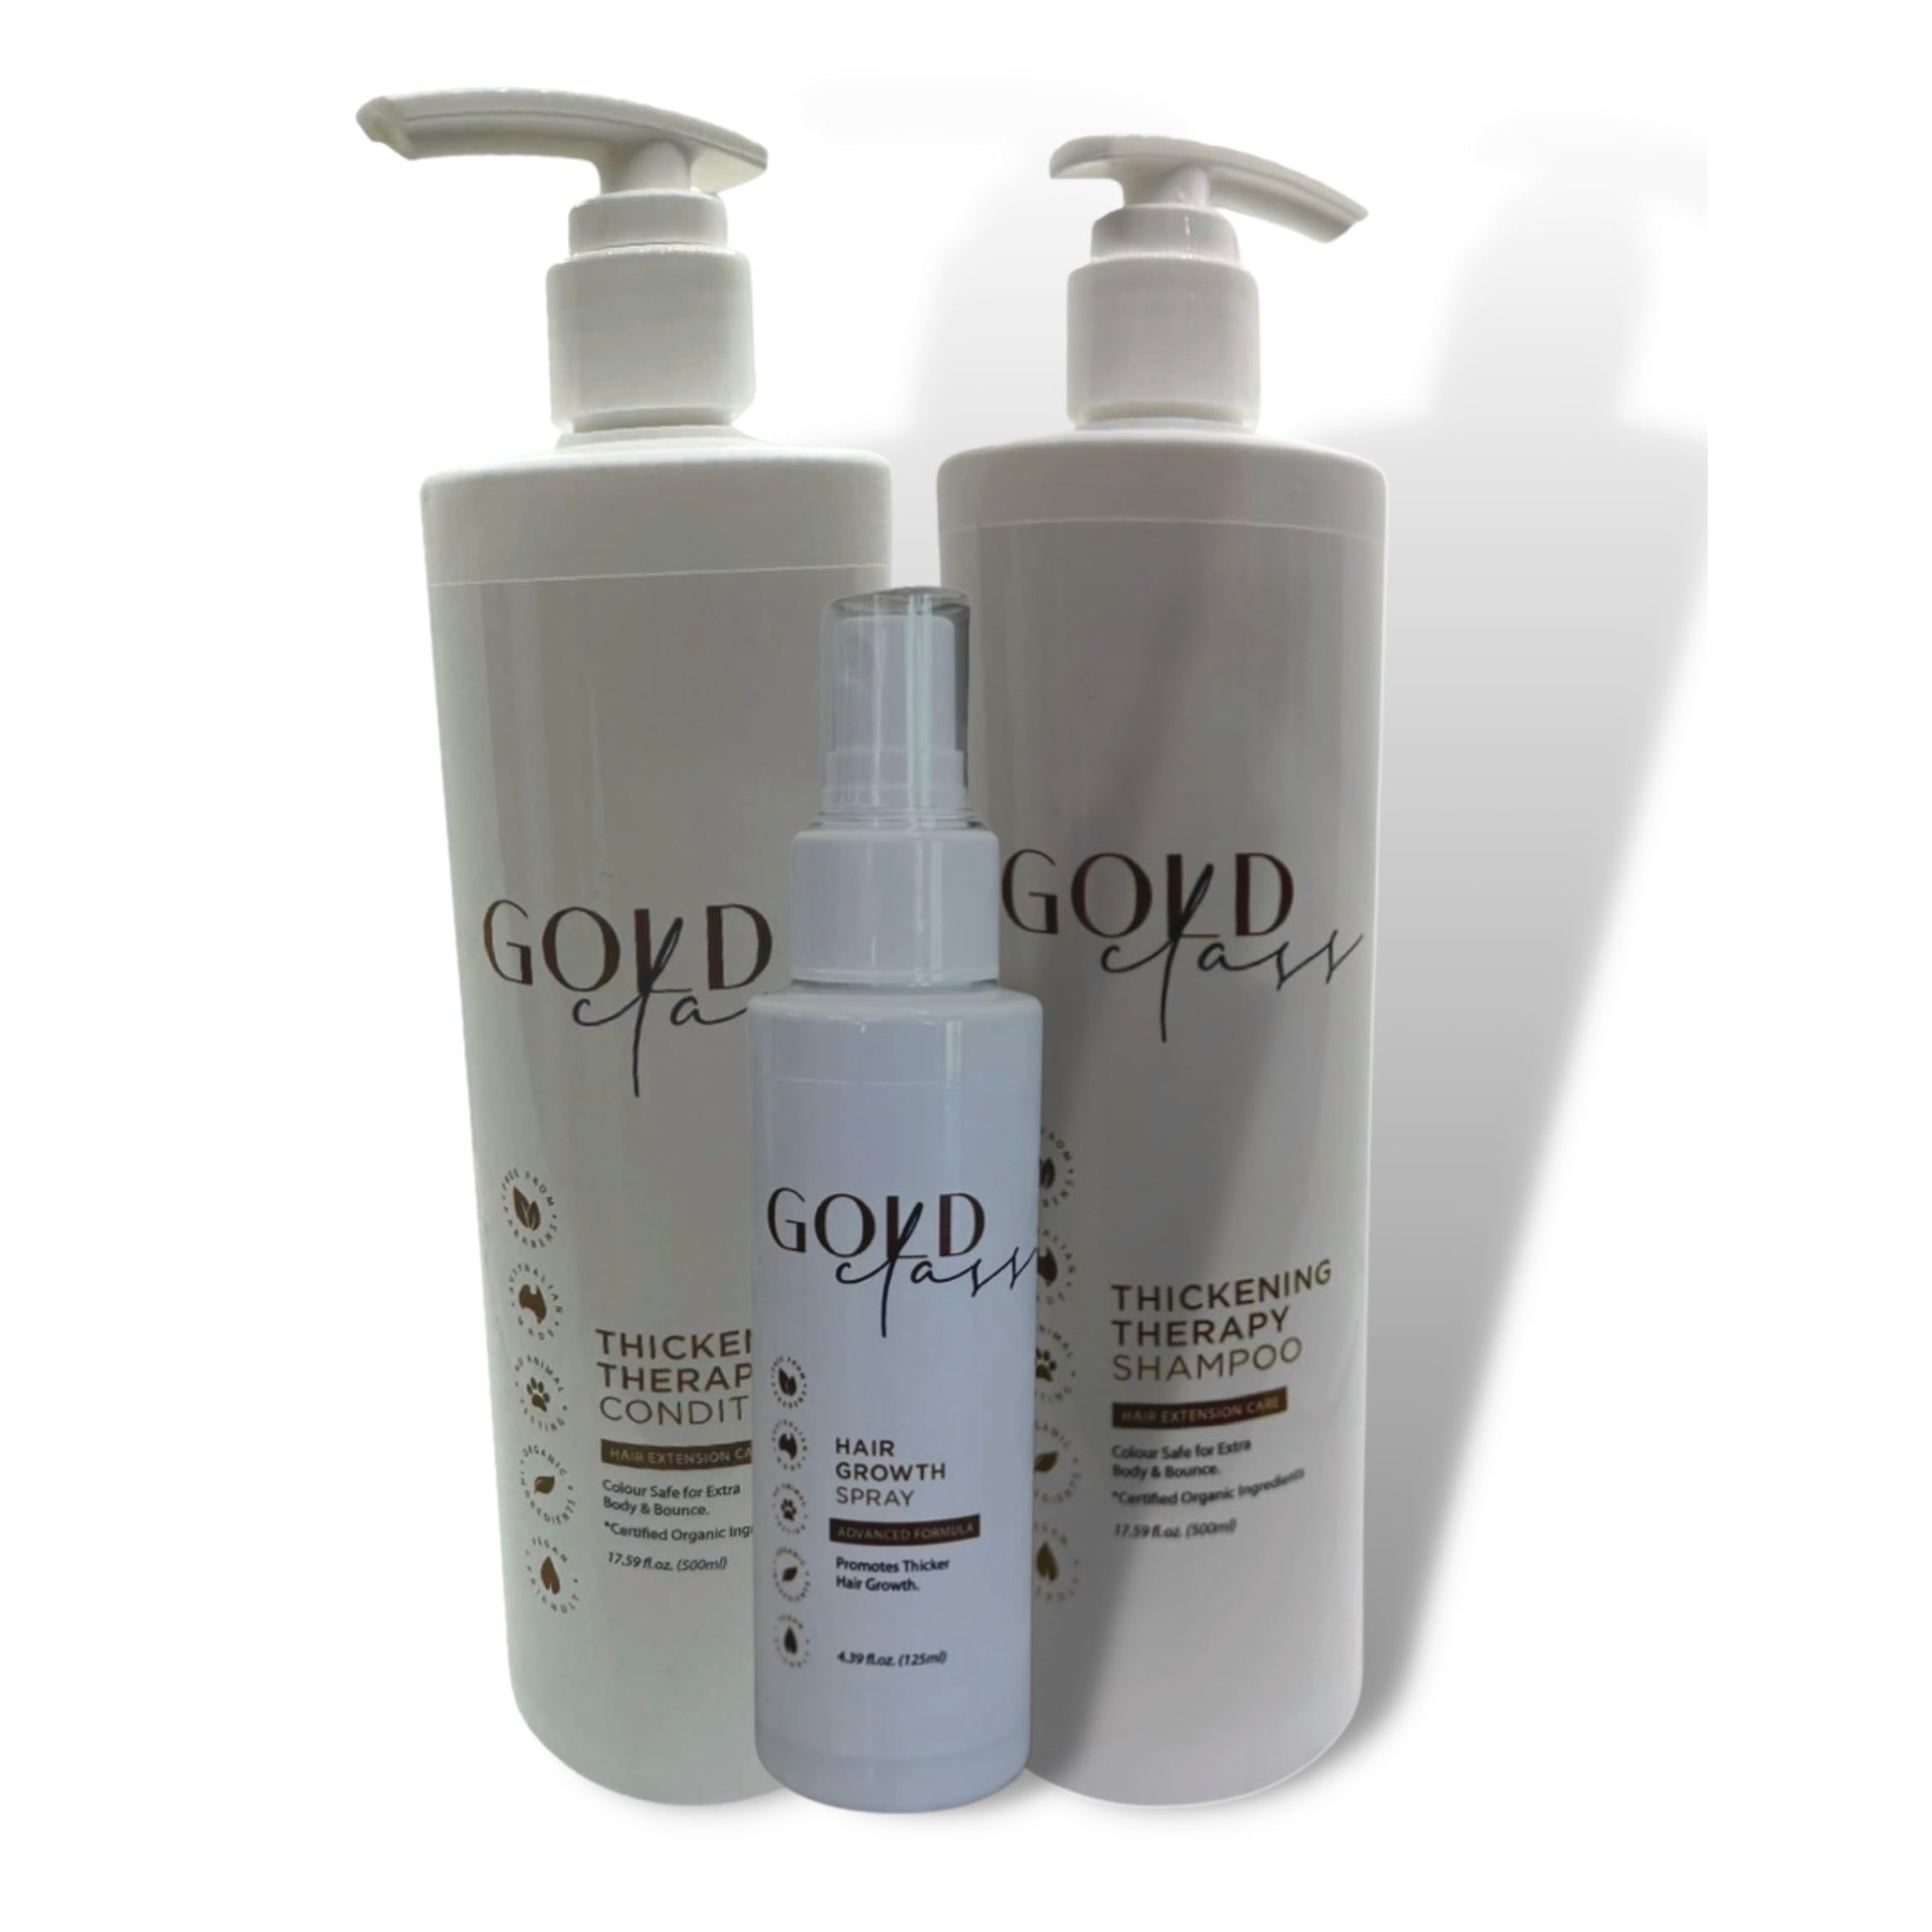 Hair growth spray + thickening therapy Shampoo and conditioner